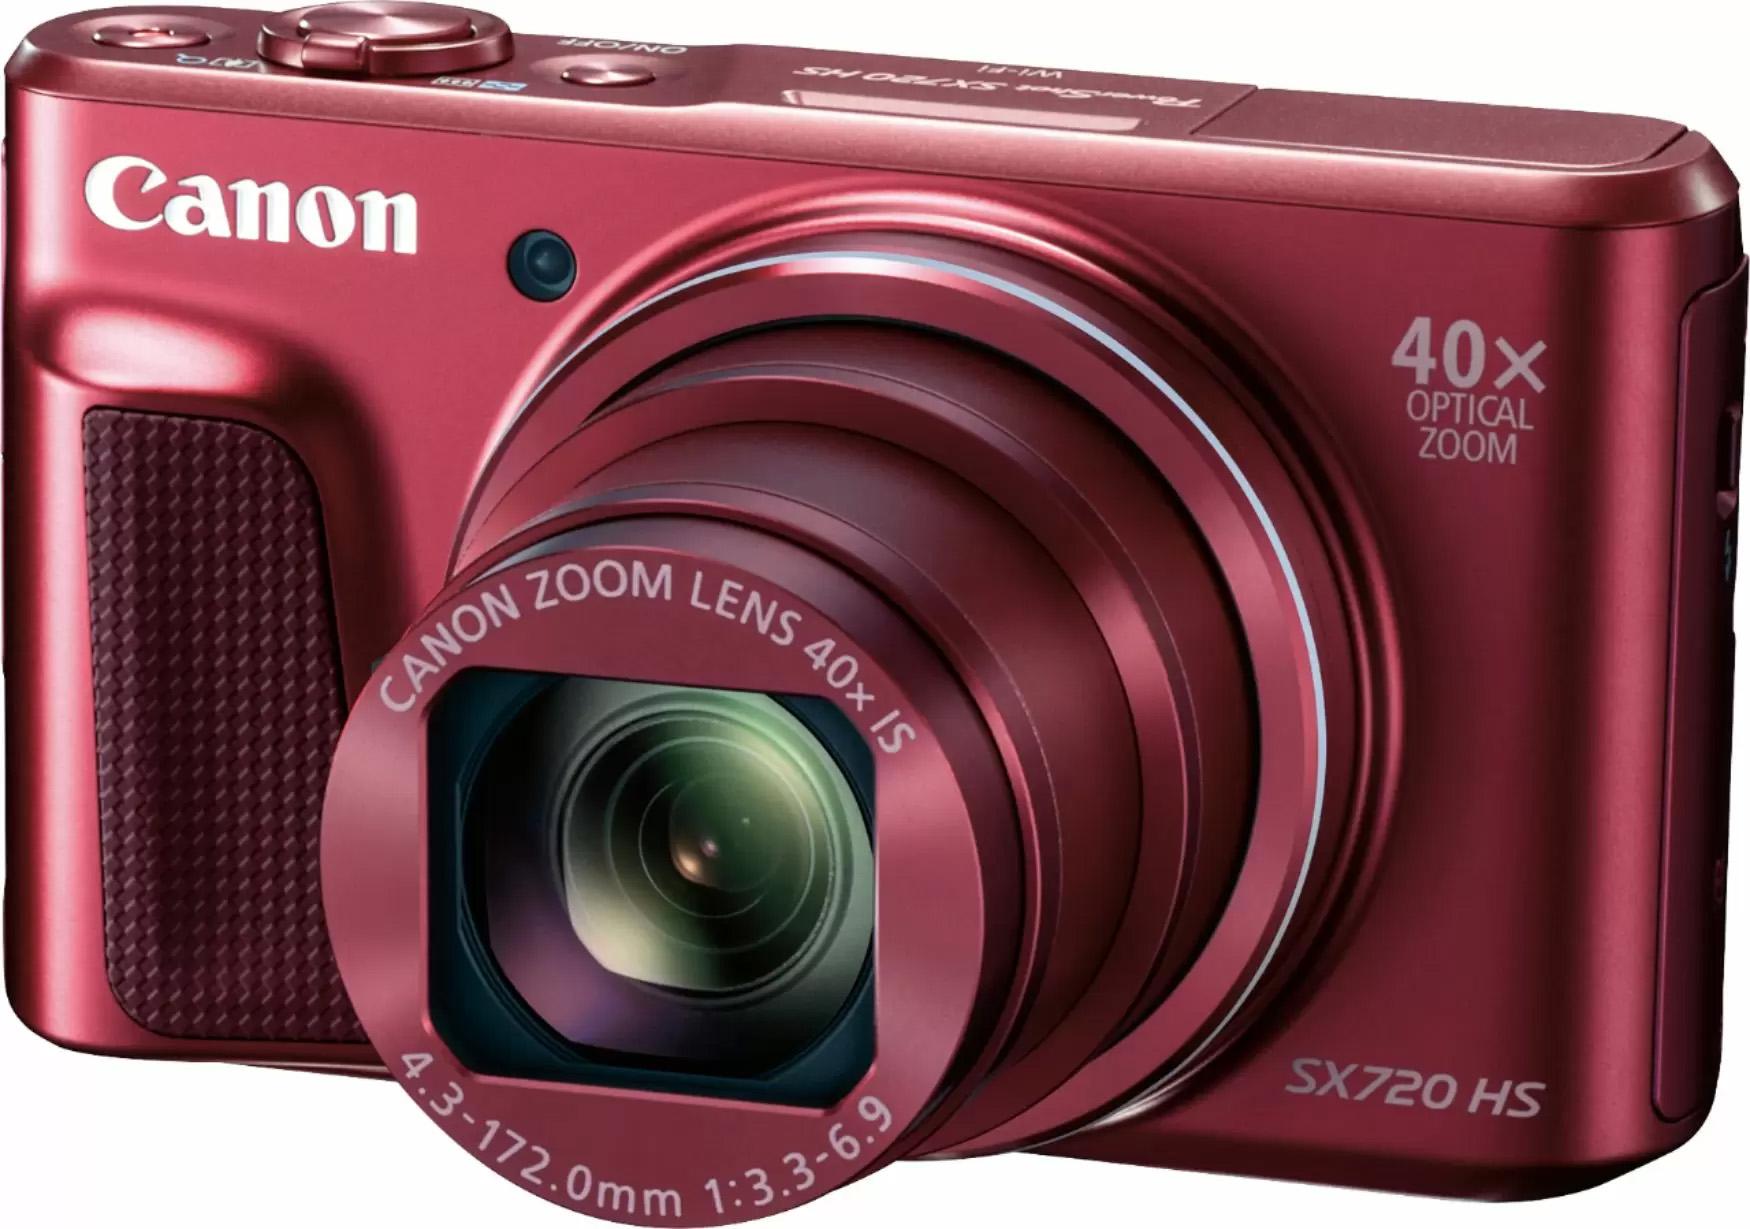 Canon PowerShot SX720 HS 20.3MP Digital Camera for $149.99 Shipped